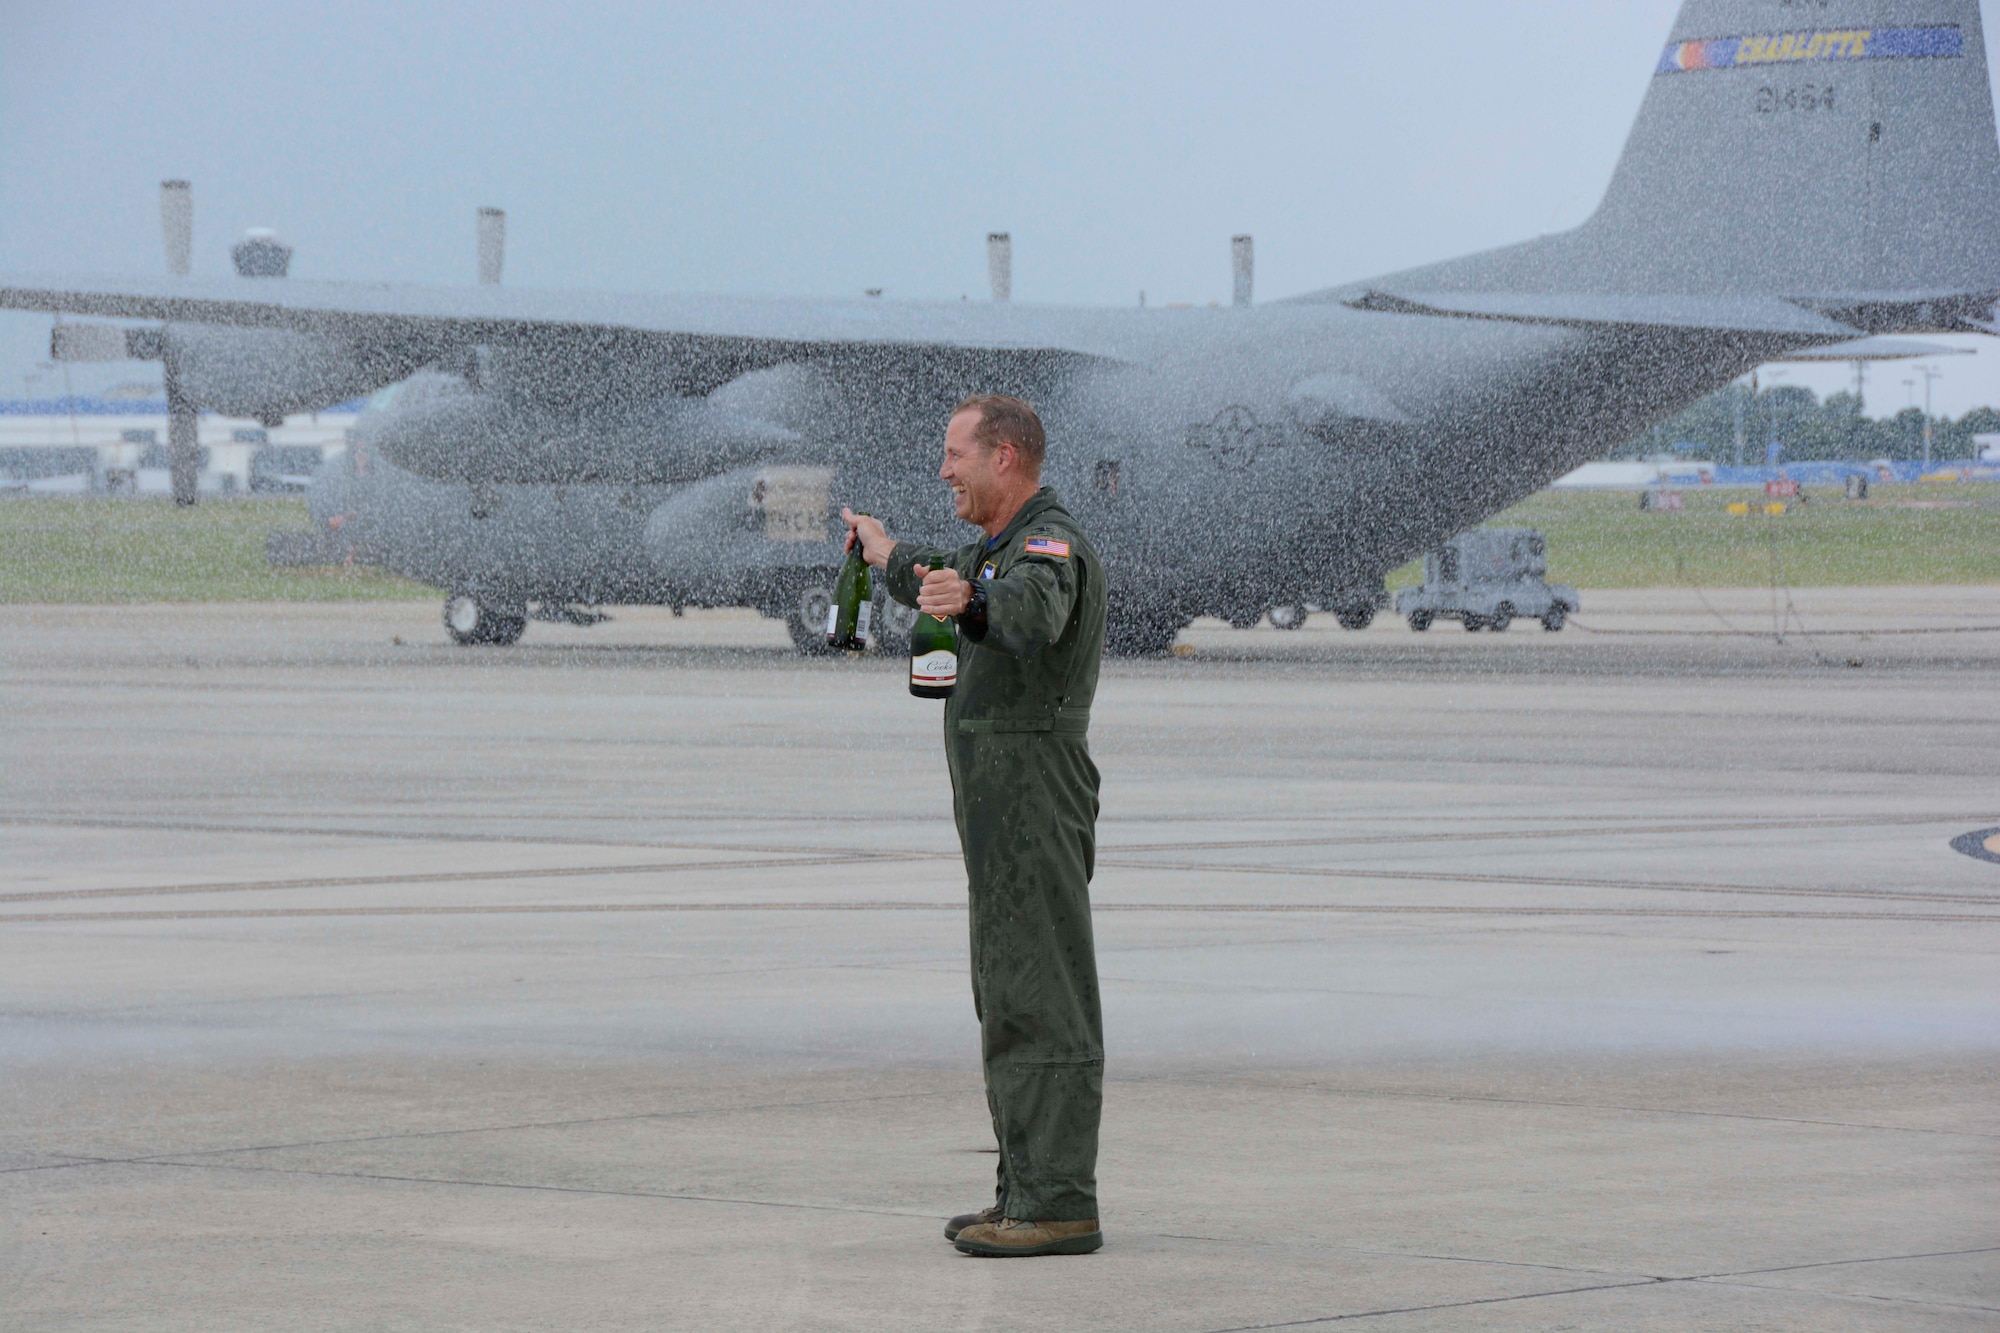 U.S. Air Force Col. Charles D. Davis III, takes on a blast of water from a fire truck after being doused with champagne following his “fini” flight at the North Carolina Air National Guard Base, Charlotte Douglas International Airport, July 28, 2015, symbolizing the end of 38 years of honorable military service. It is a tradition to spray both the aircraft and the aircrew member upon their final flight. (U.S. Air National Guard photo by Master Sgt. Patricia F. Moran, 145th Public Affairs/Released)